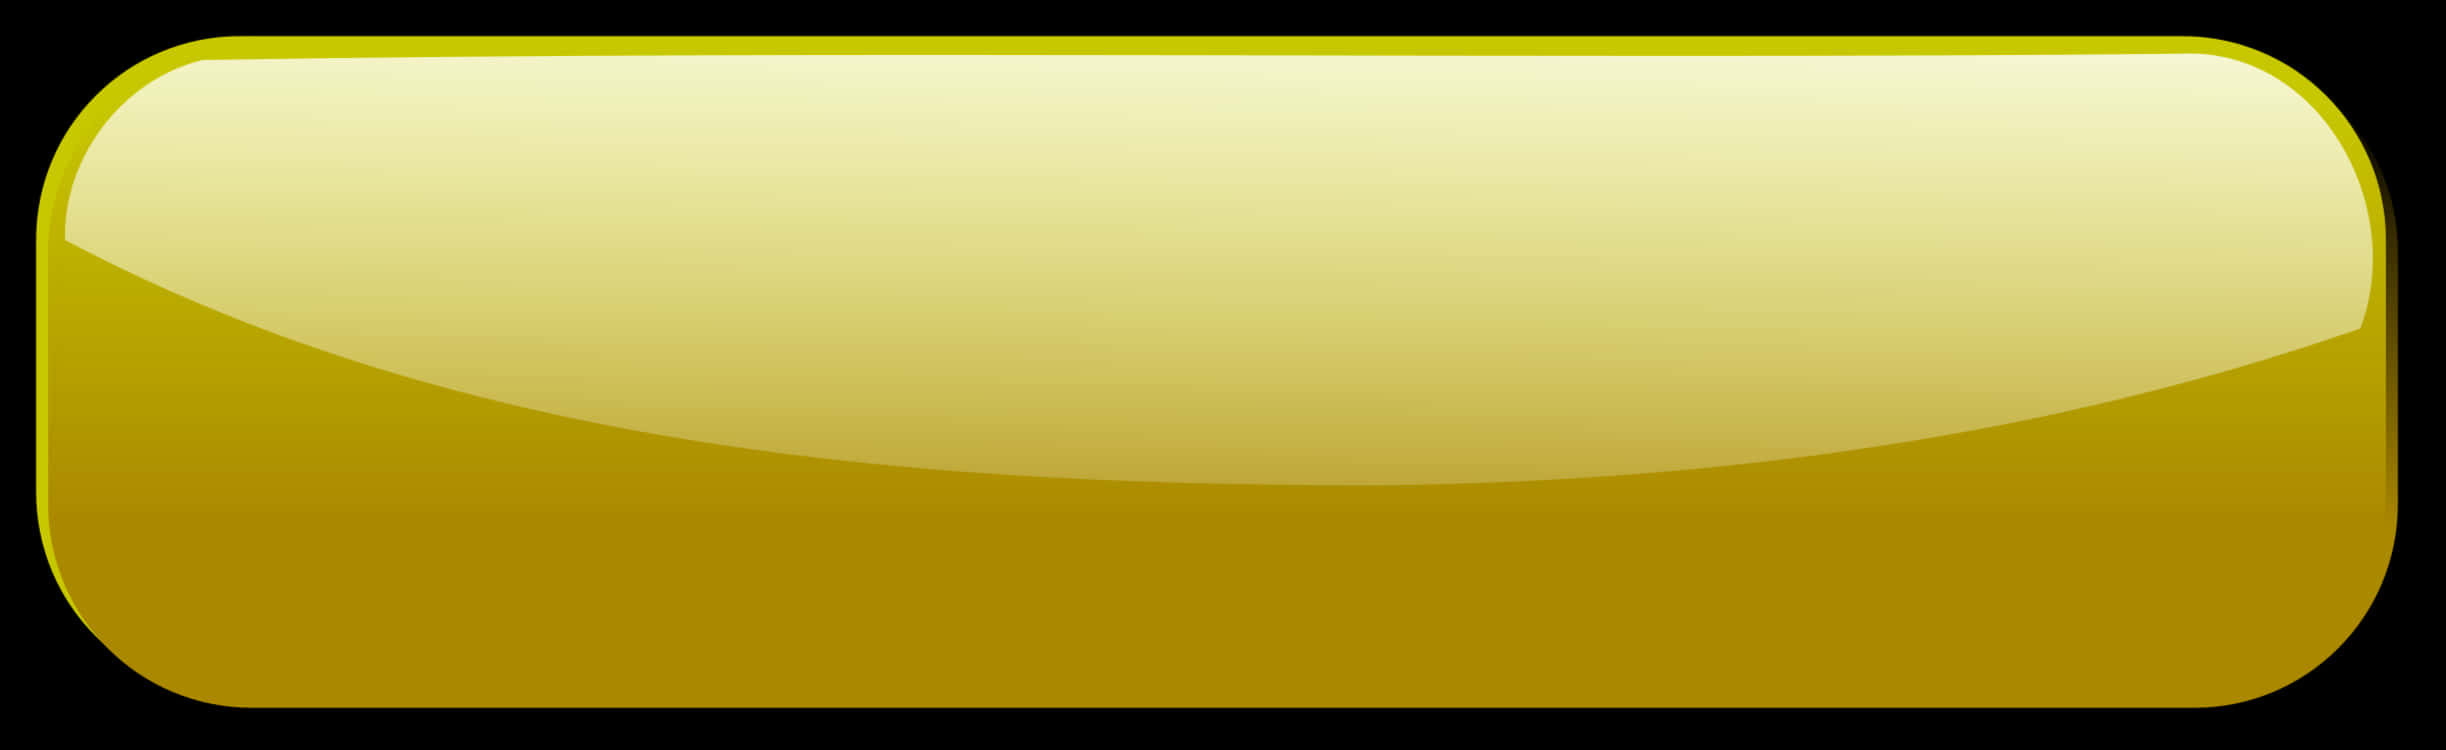 Golden Subscribe Button Blank PNG image